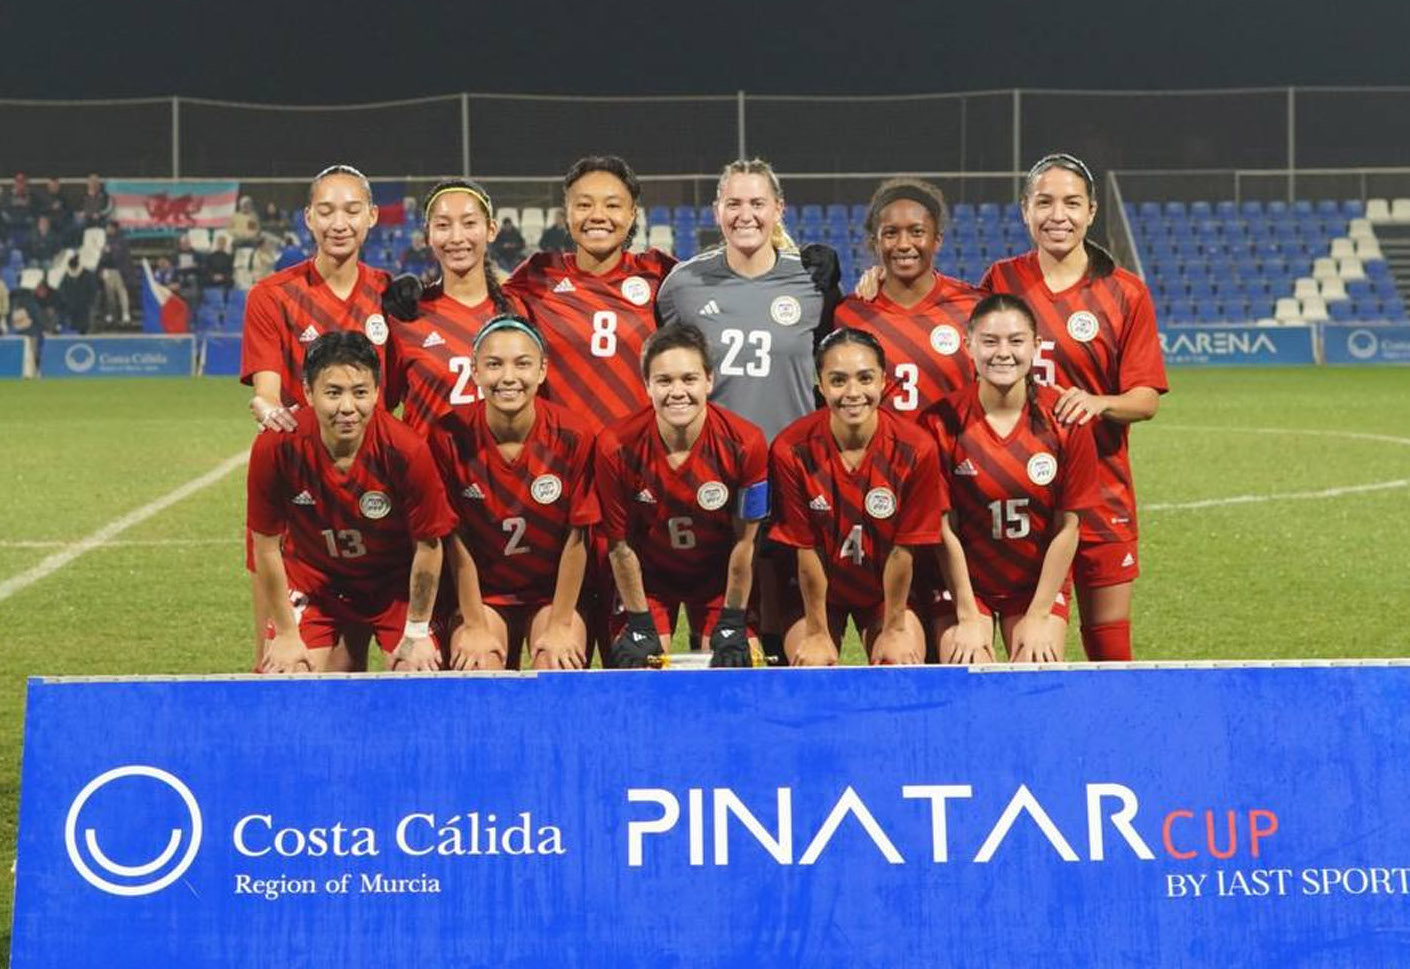 The Philippine women's soccer team before their match against Iceland in the Pinatar Cup.  – PHILIPPINES FACEBOOK PAGE